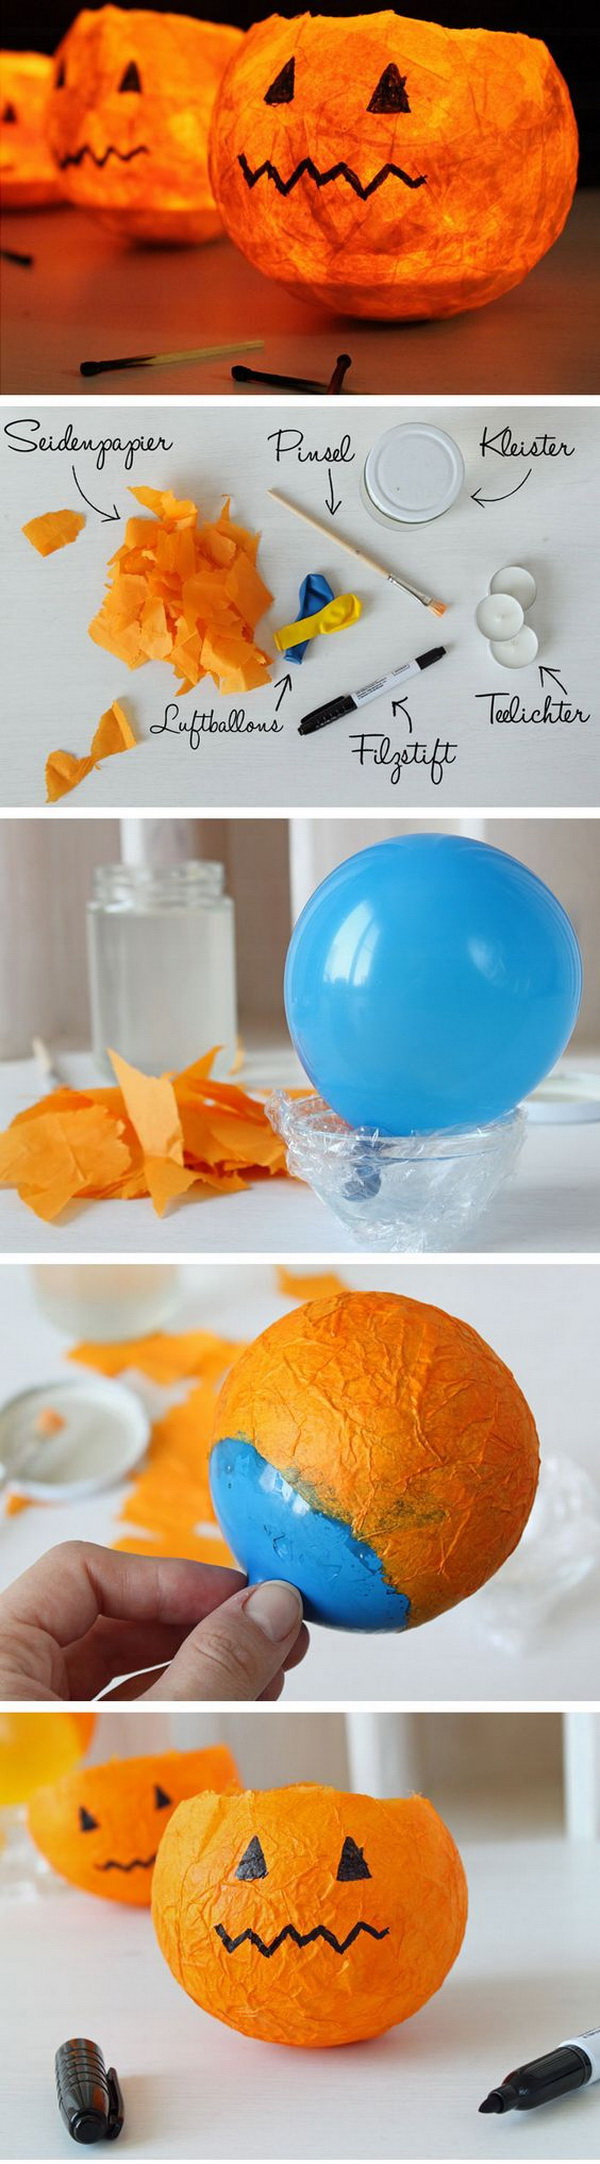 DIY Pumpkin Wind Light. Light up some night time fun with an easy DIY pumpkin wind lantern light! Easy and fun to make with a balloon!